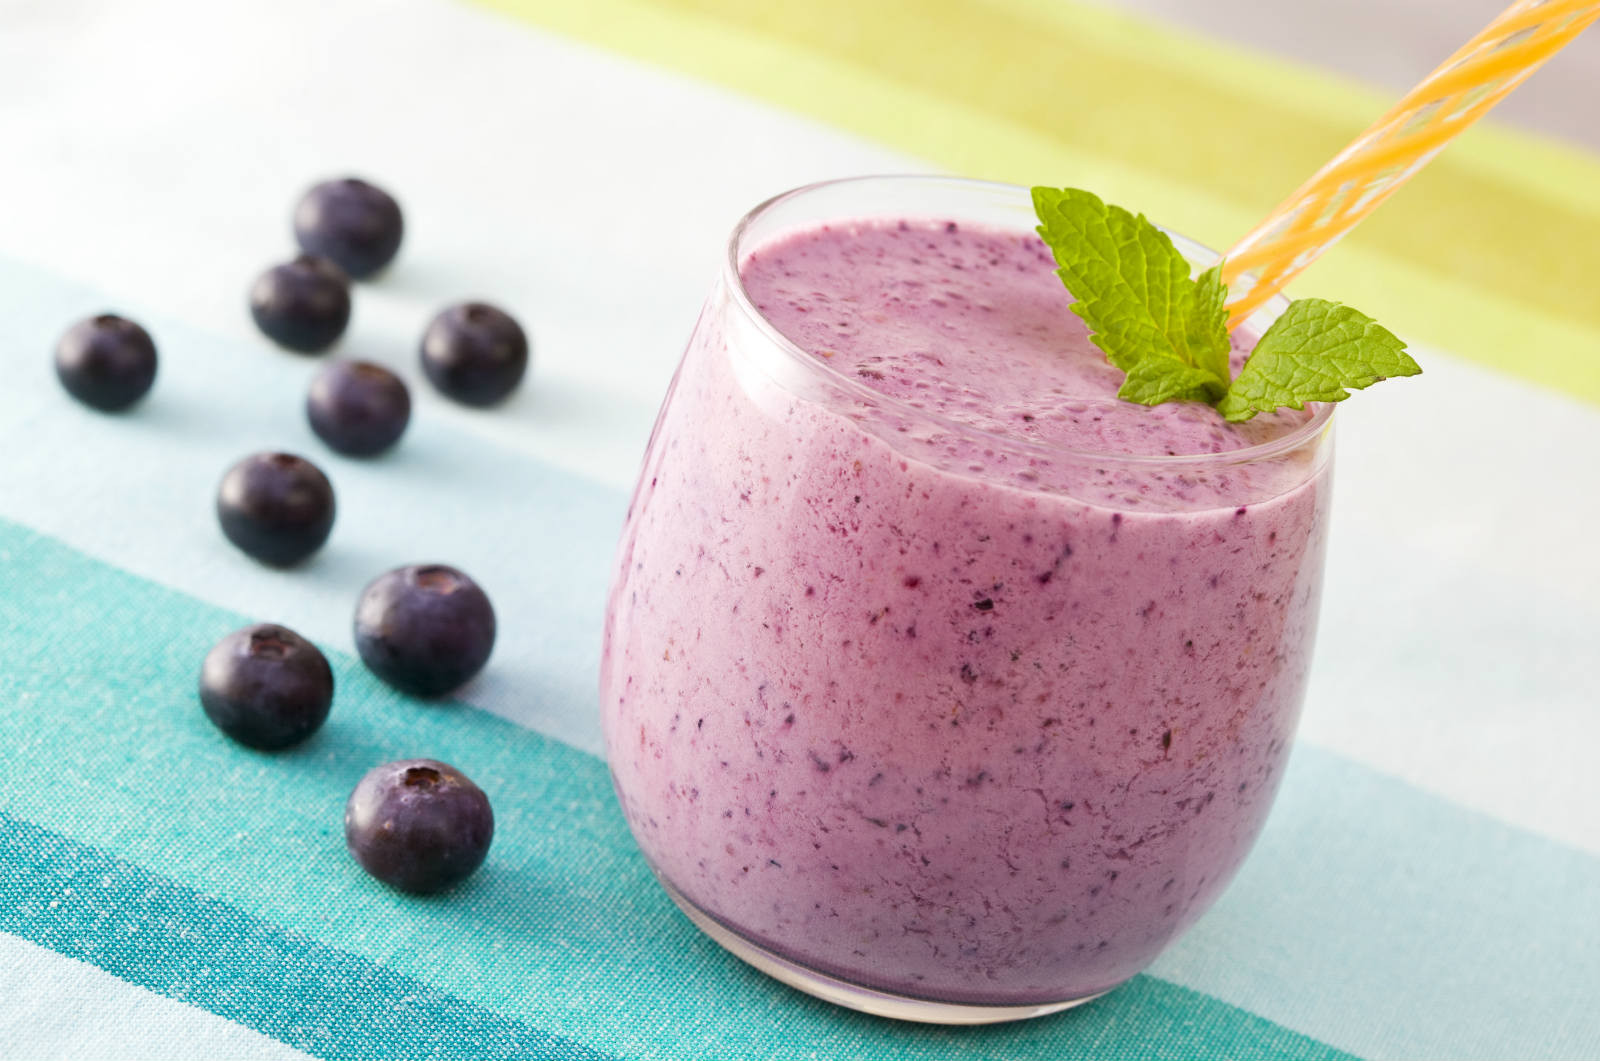 Blueberry Smoothies For Weight Loss
 Lose Weight With This Amazing Mango Blueberry Smoothie Recipe